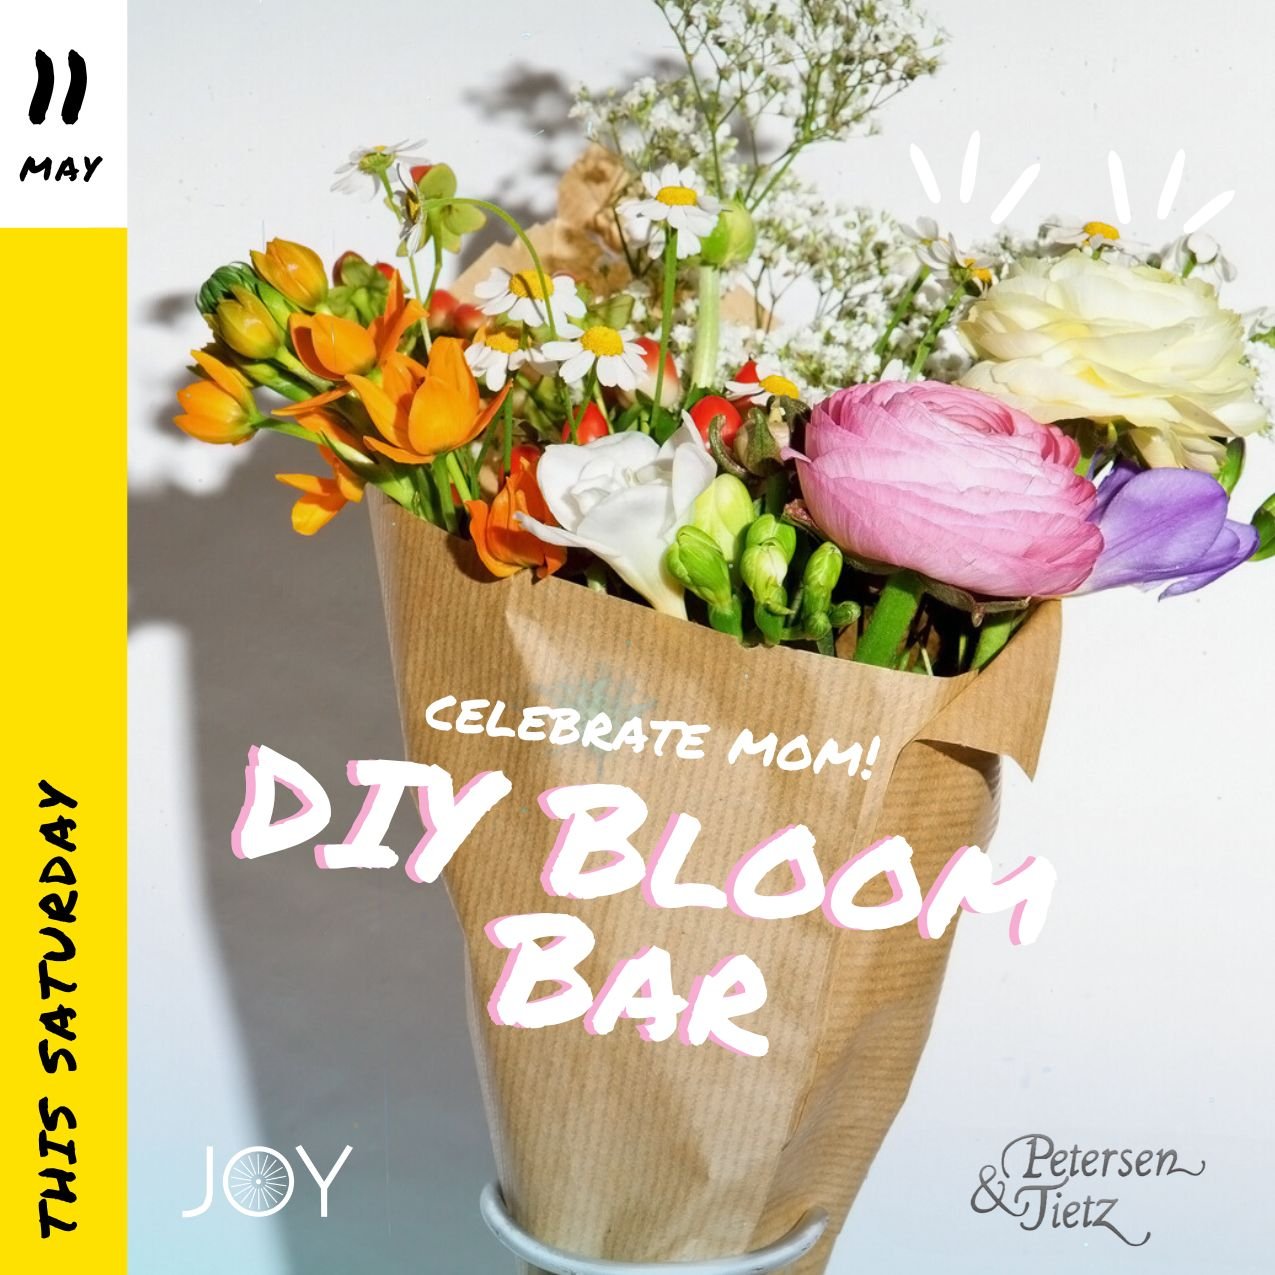 Ready to celebrate our mamas with Mimosas &amp; a DIY Bloom Bar, ahhh! 😍💐🥂 We're so excited to partner with local florist @petersenandtietz to bring our first DIY Bloom Bar to the studio this Saturday!

Book a bike to join in and stay for the fun.